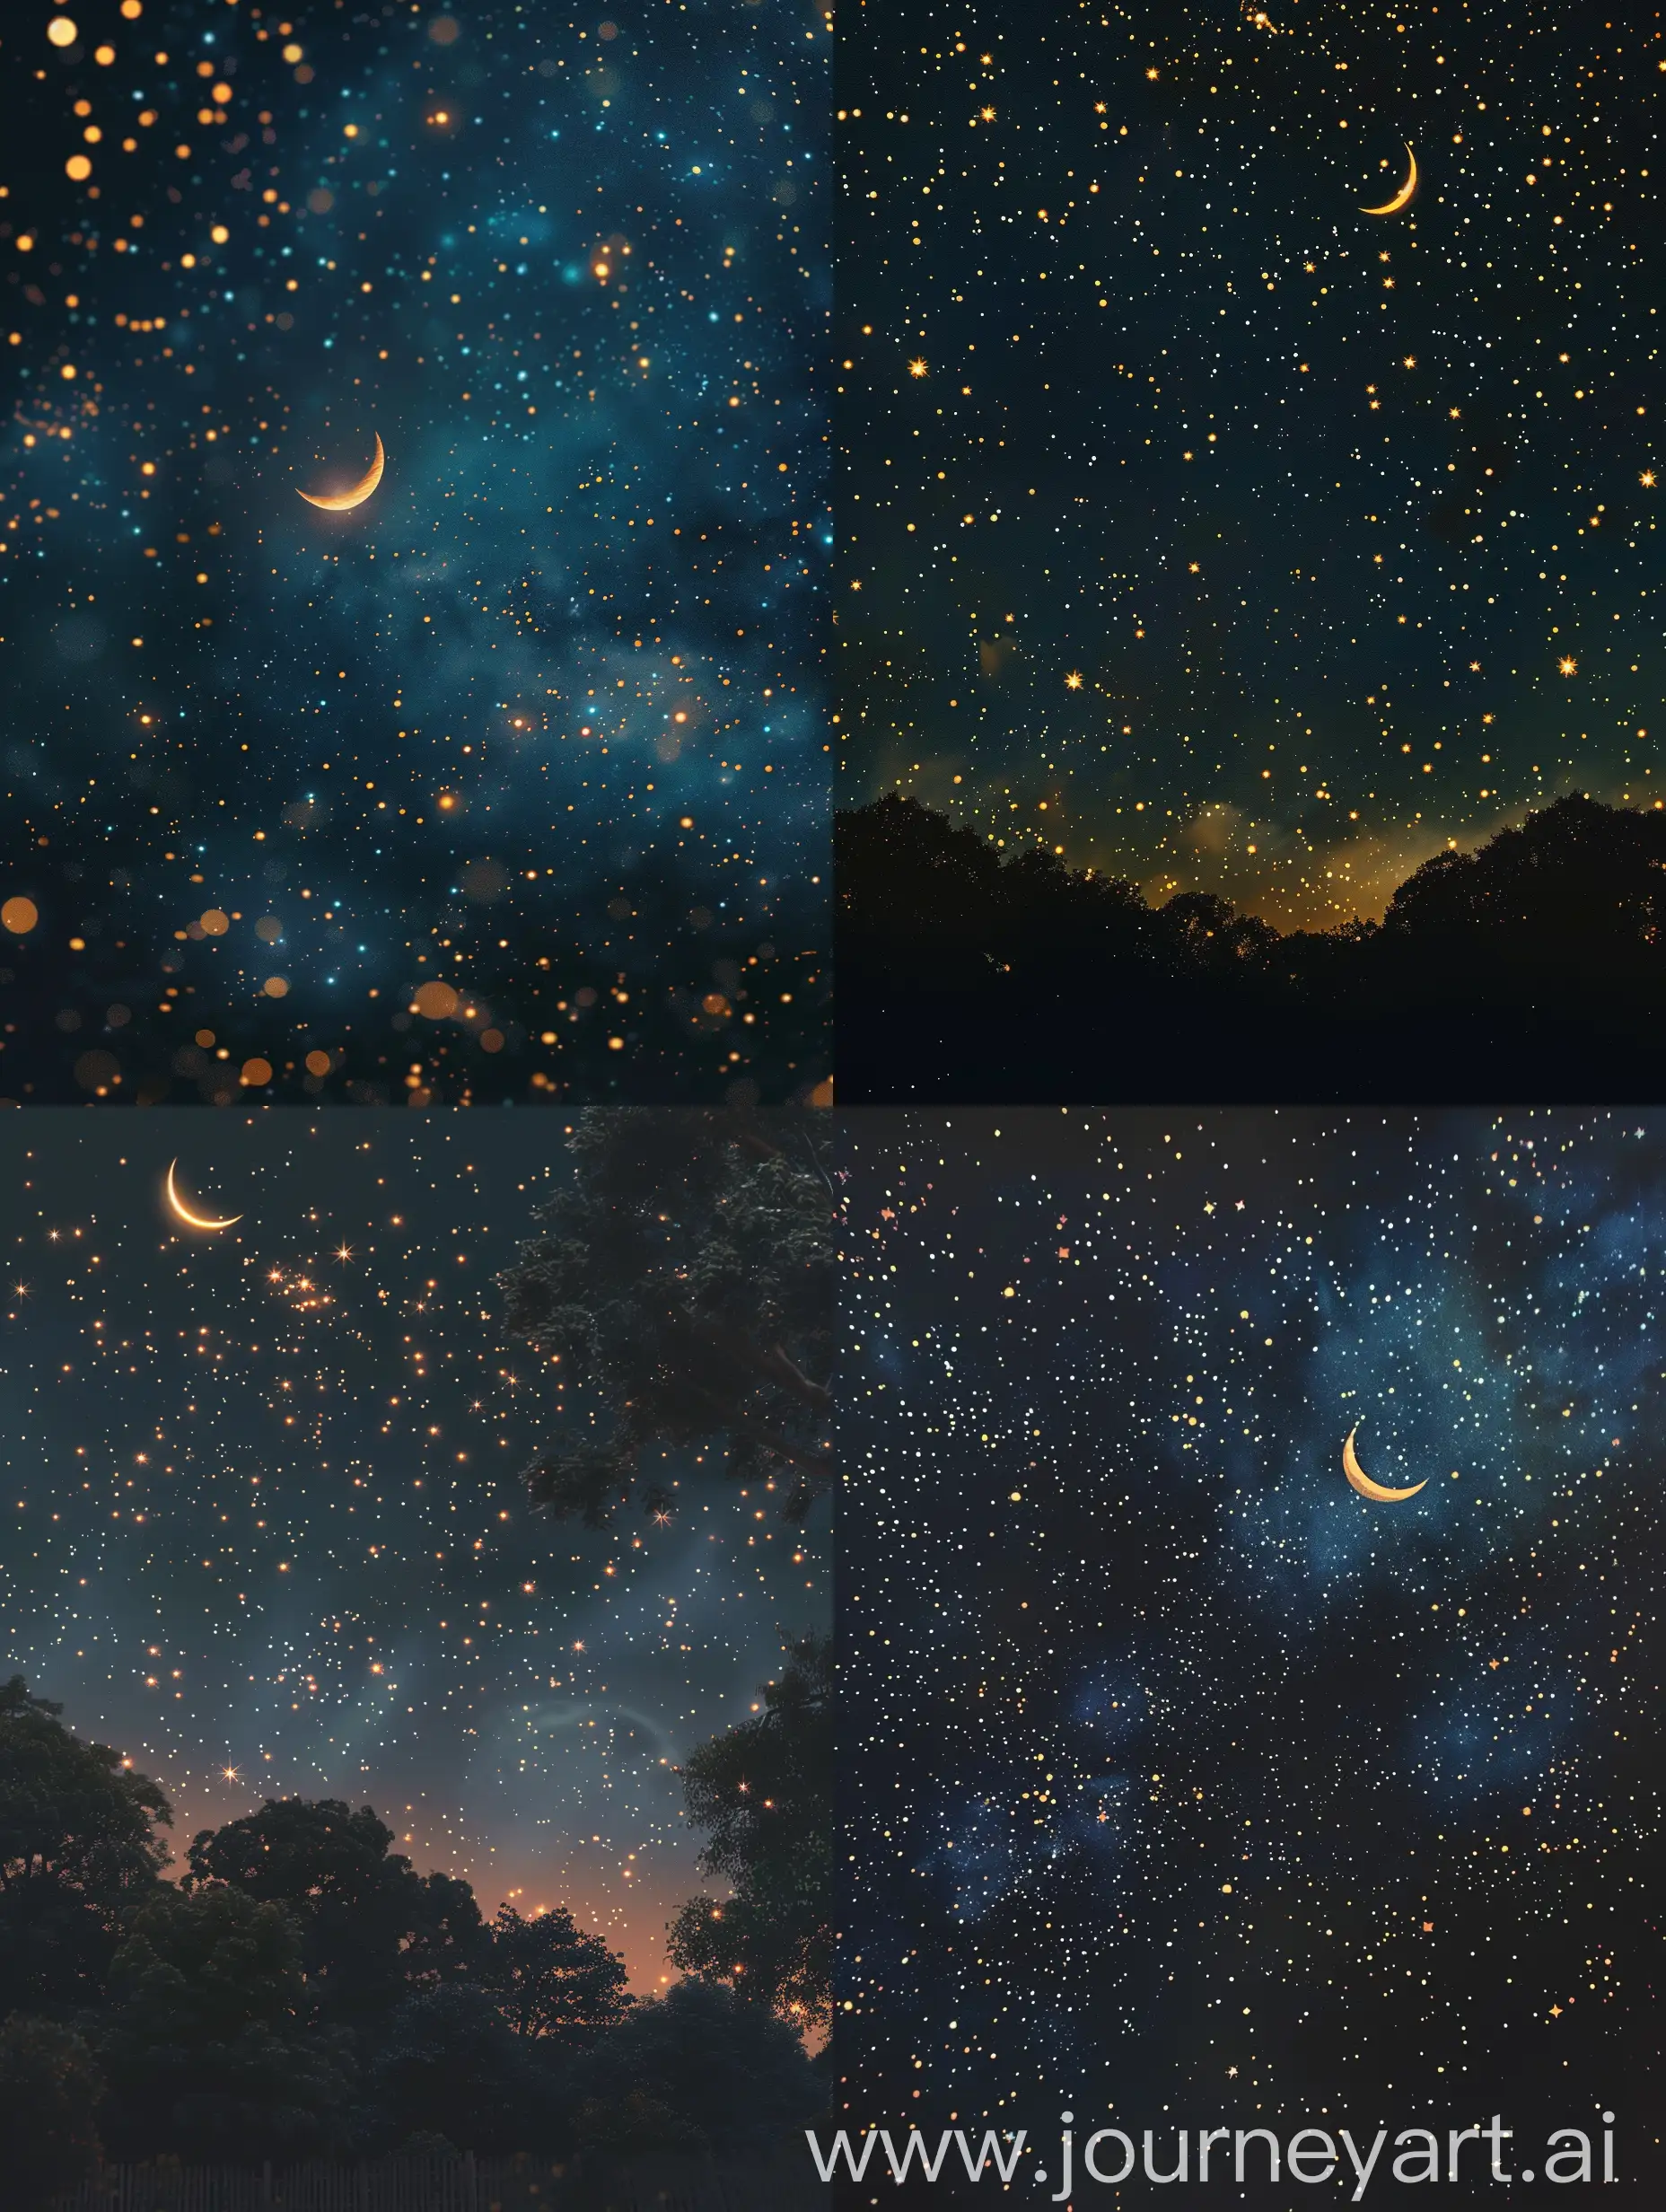 Starry-Night-Sky-with-Crescent-Moon-in-UltraRealistic-Canon-EOSID-X-Mark-III-DSLR-Capture